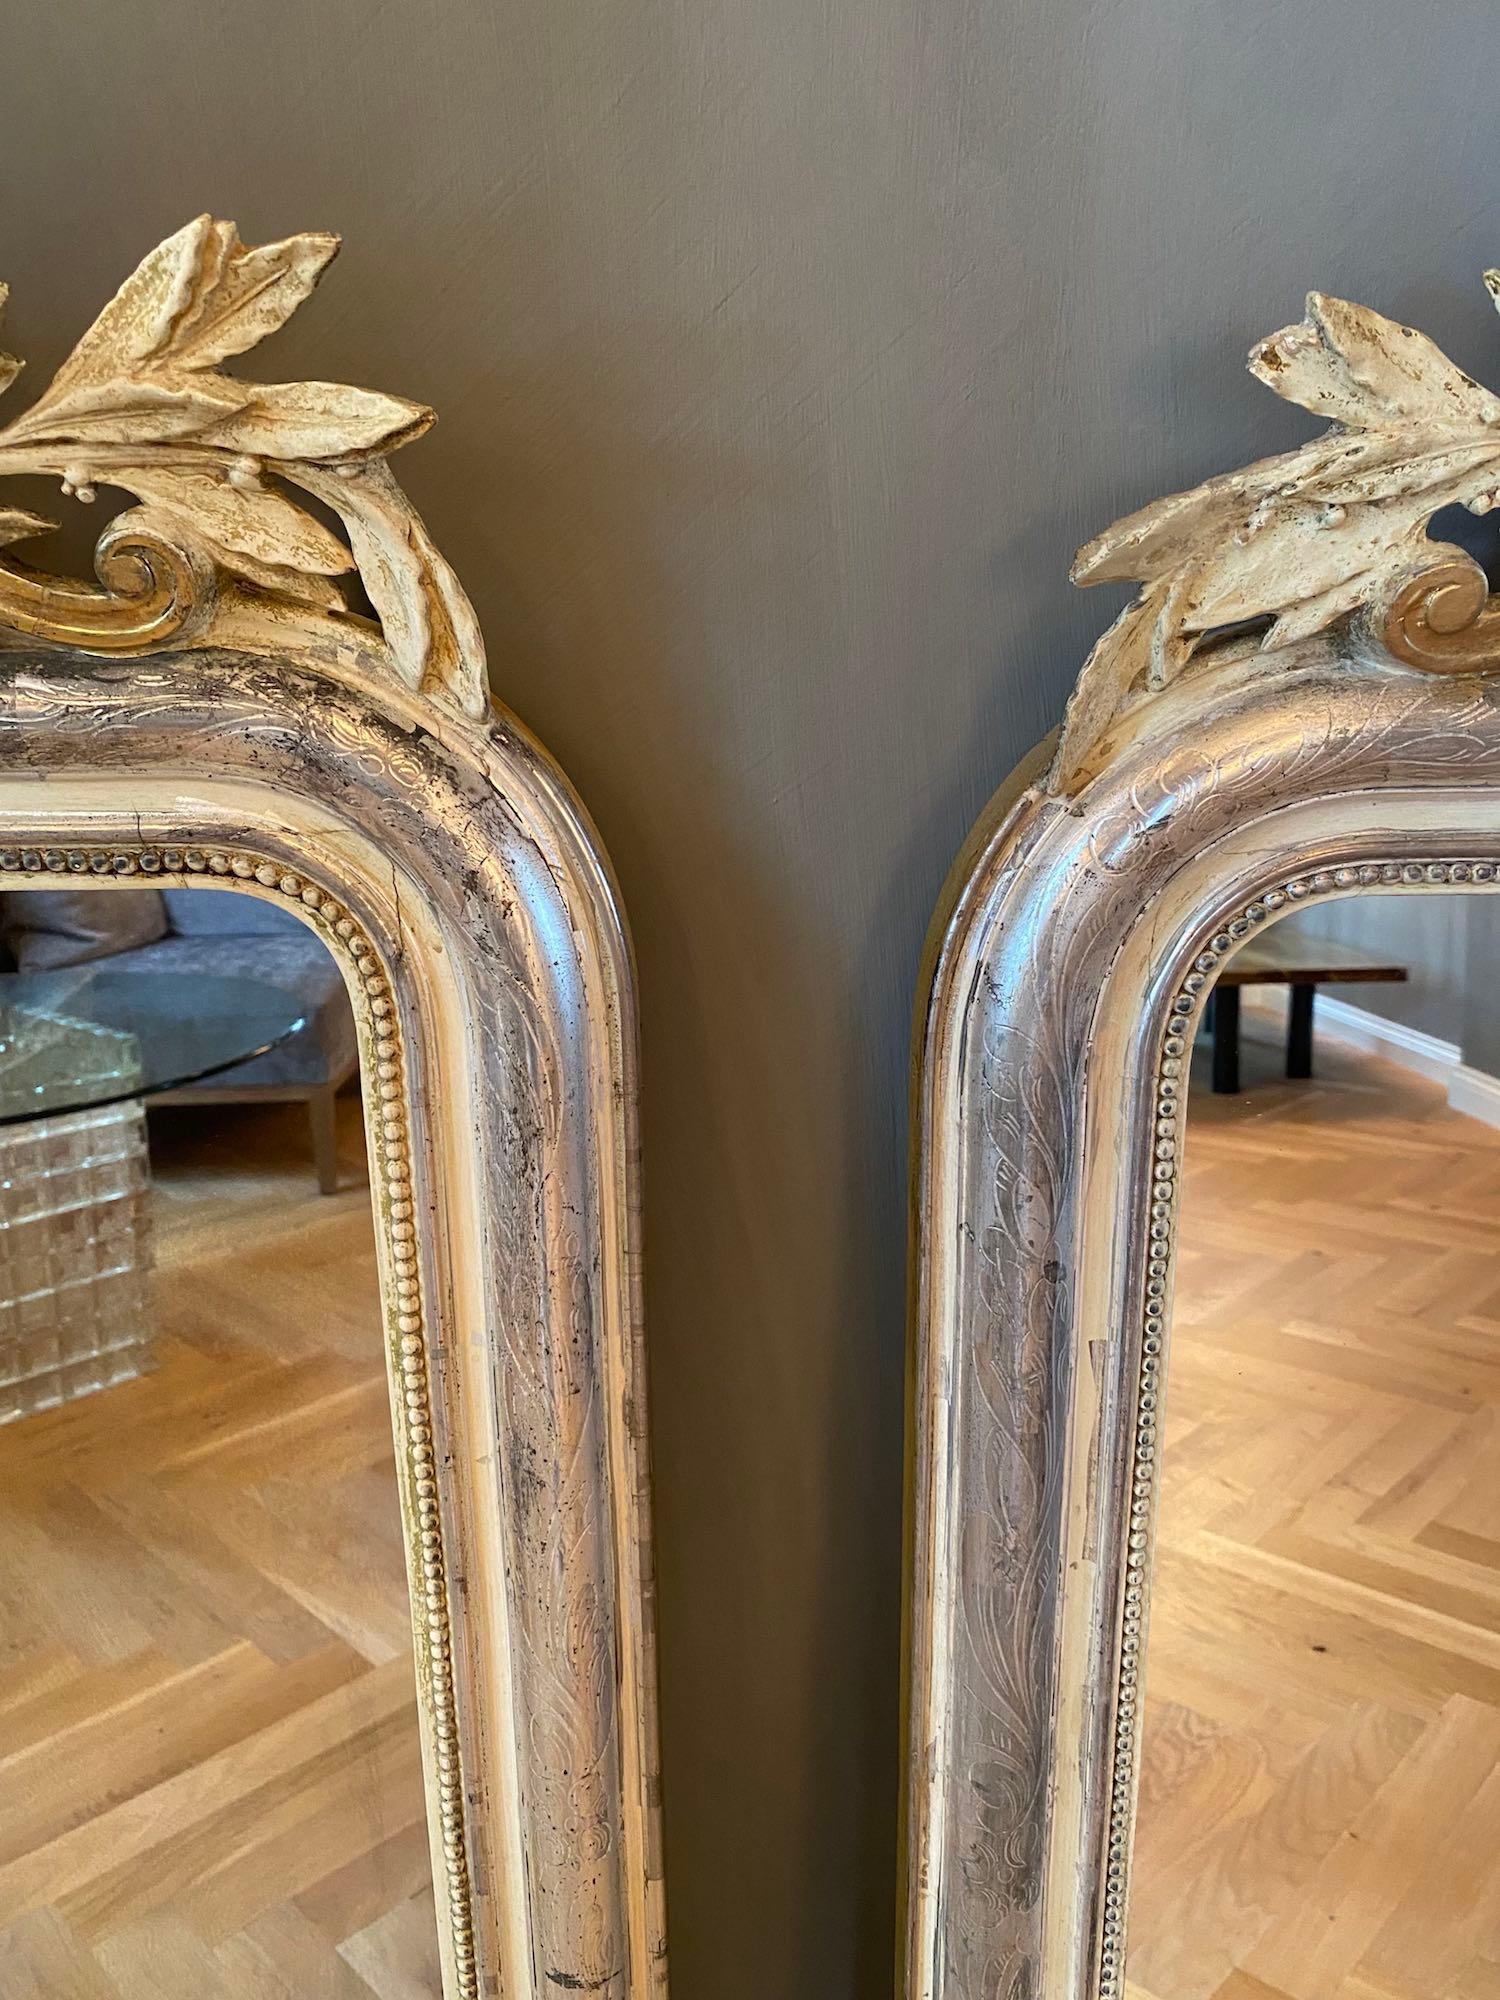 A very unique, decorative and beautiful pair of antique French mirror with its original glass and silver leaf gilding.
The beautiful crown is festooned with carved foliate motifs, scrolls, floral decoration and a small mirror.
The frame is etched